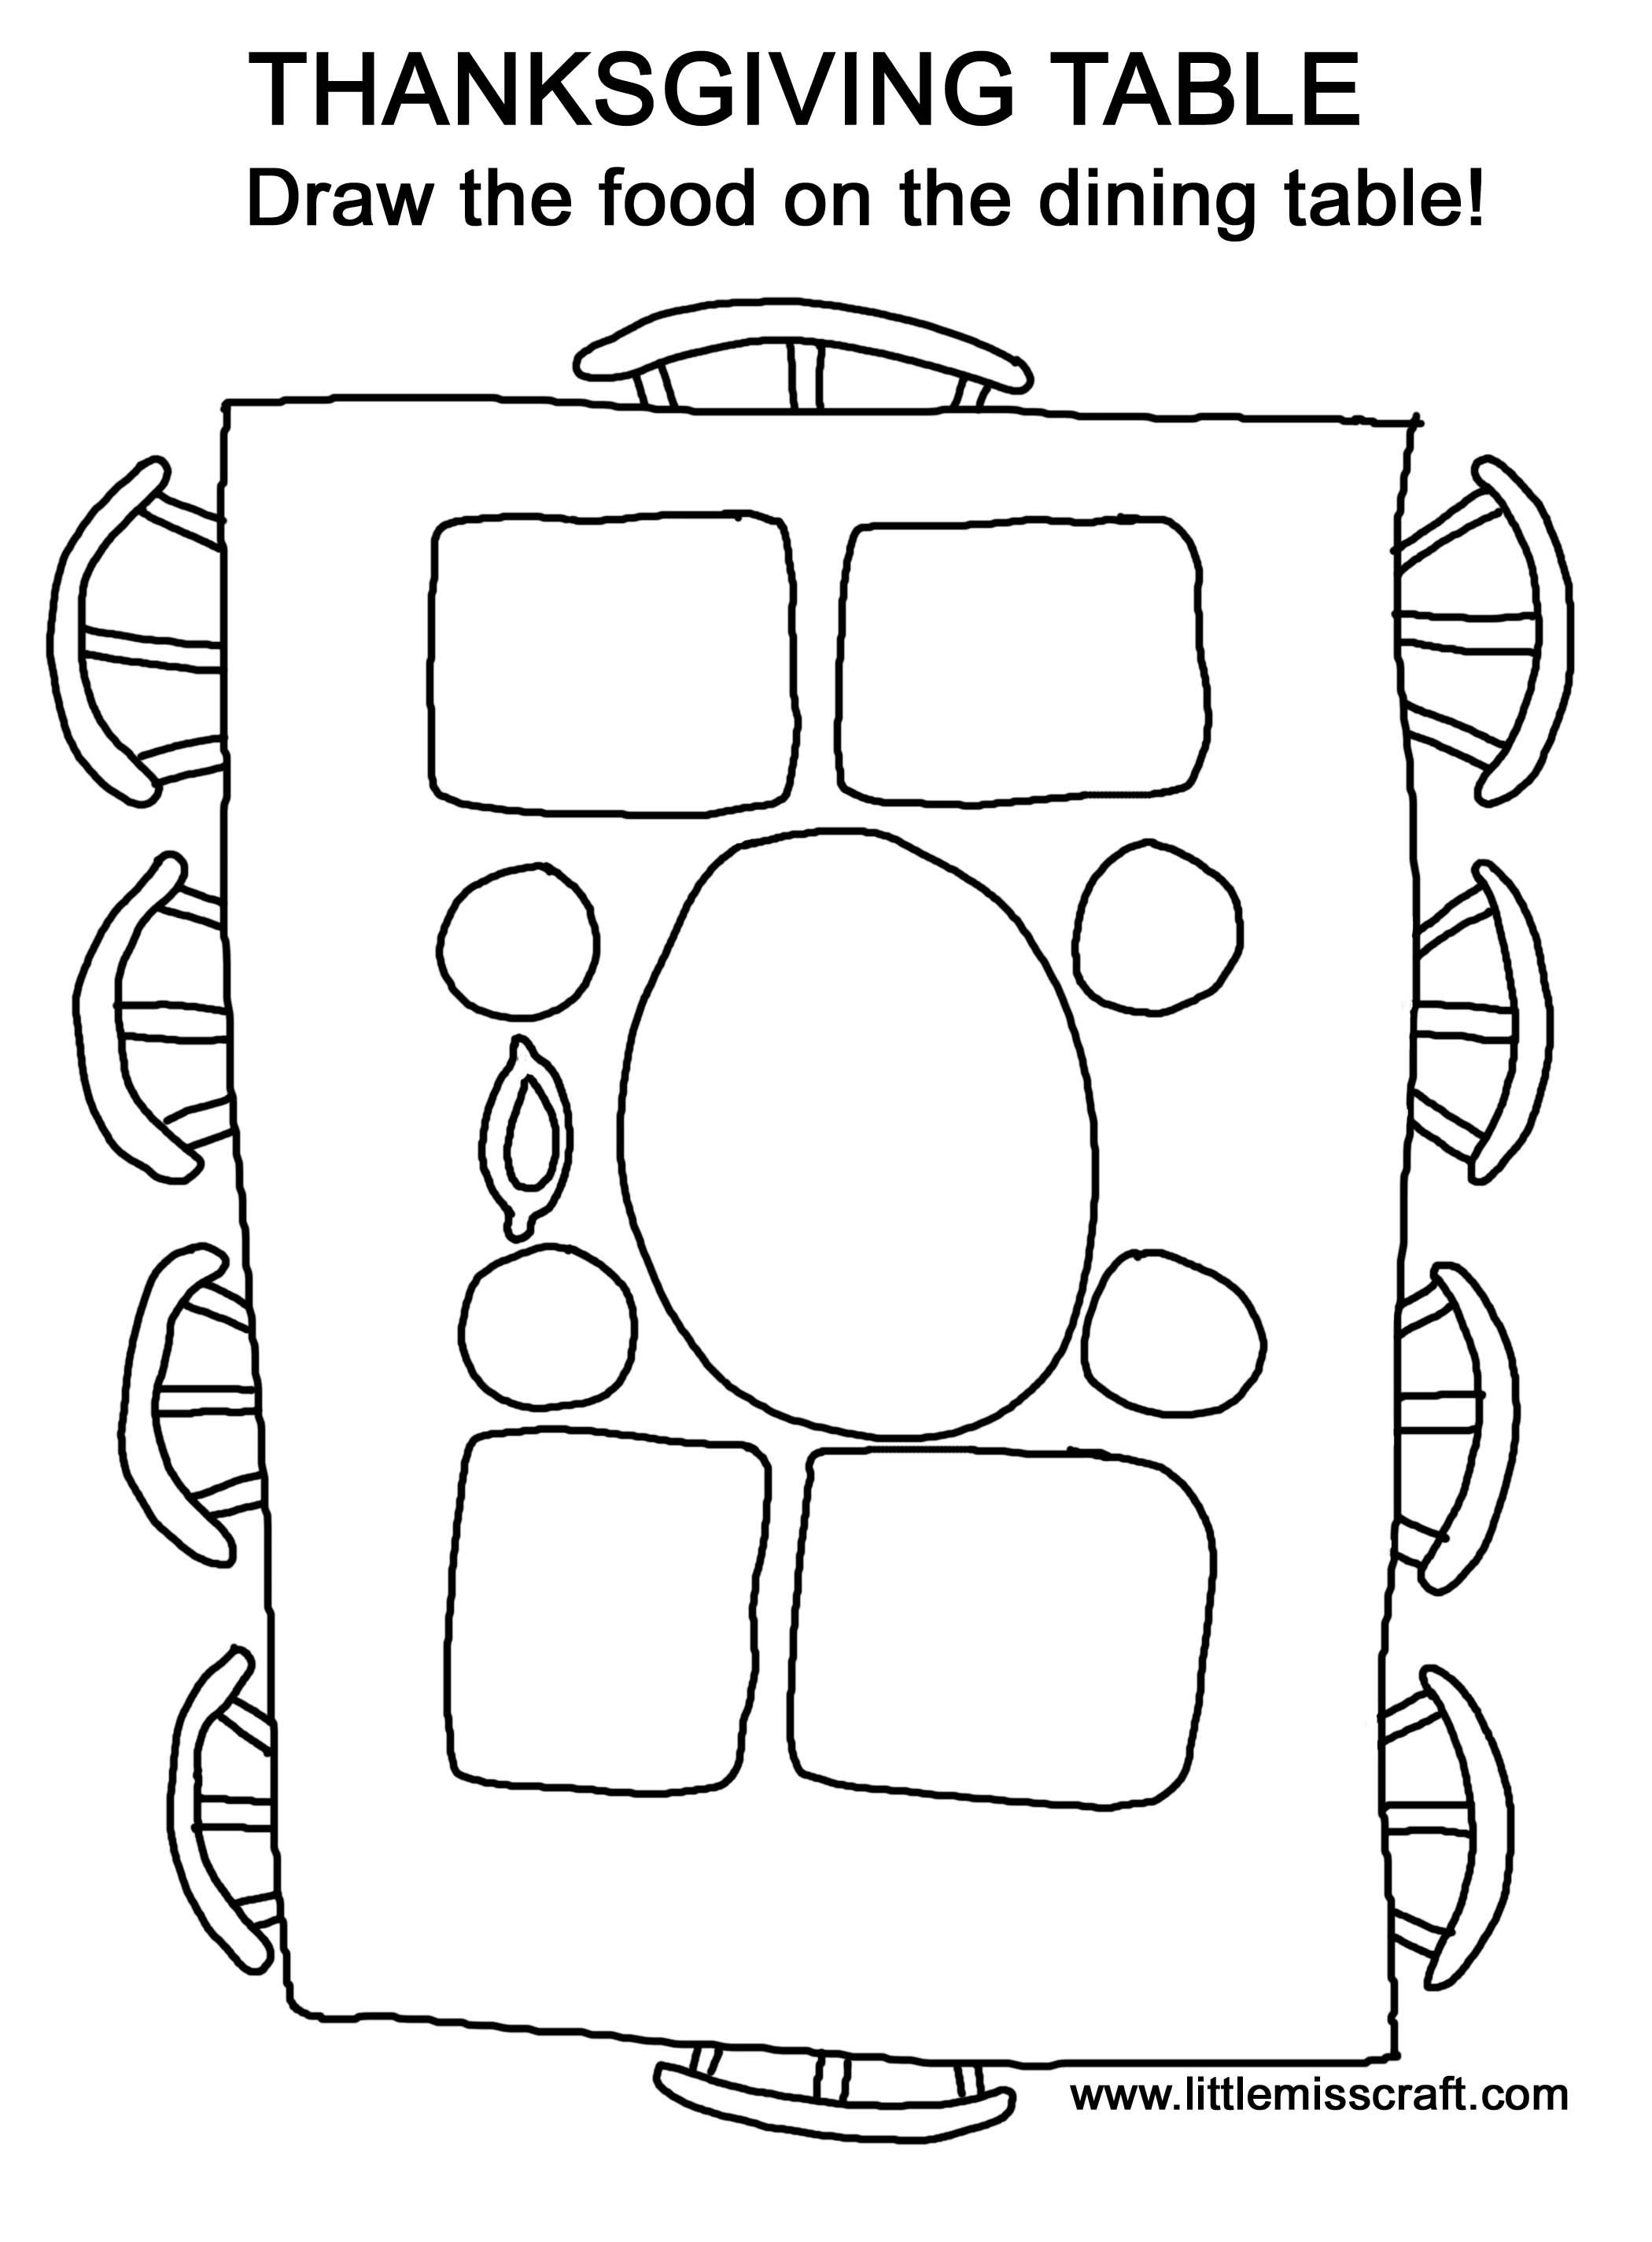 Crafts - Thanksgiving Turkey Doodle Coloring Page